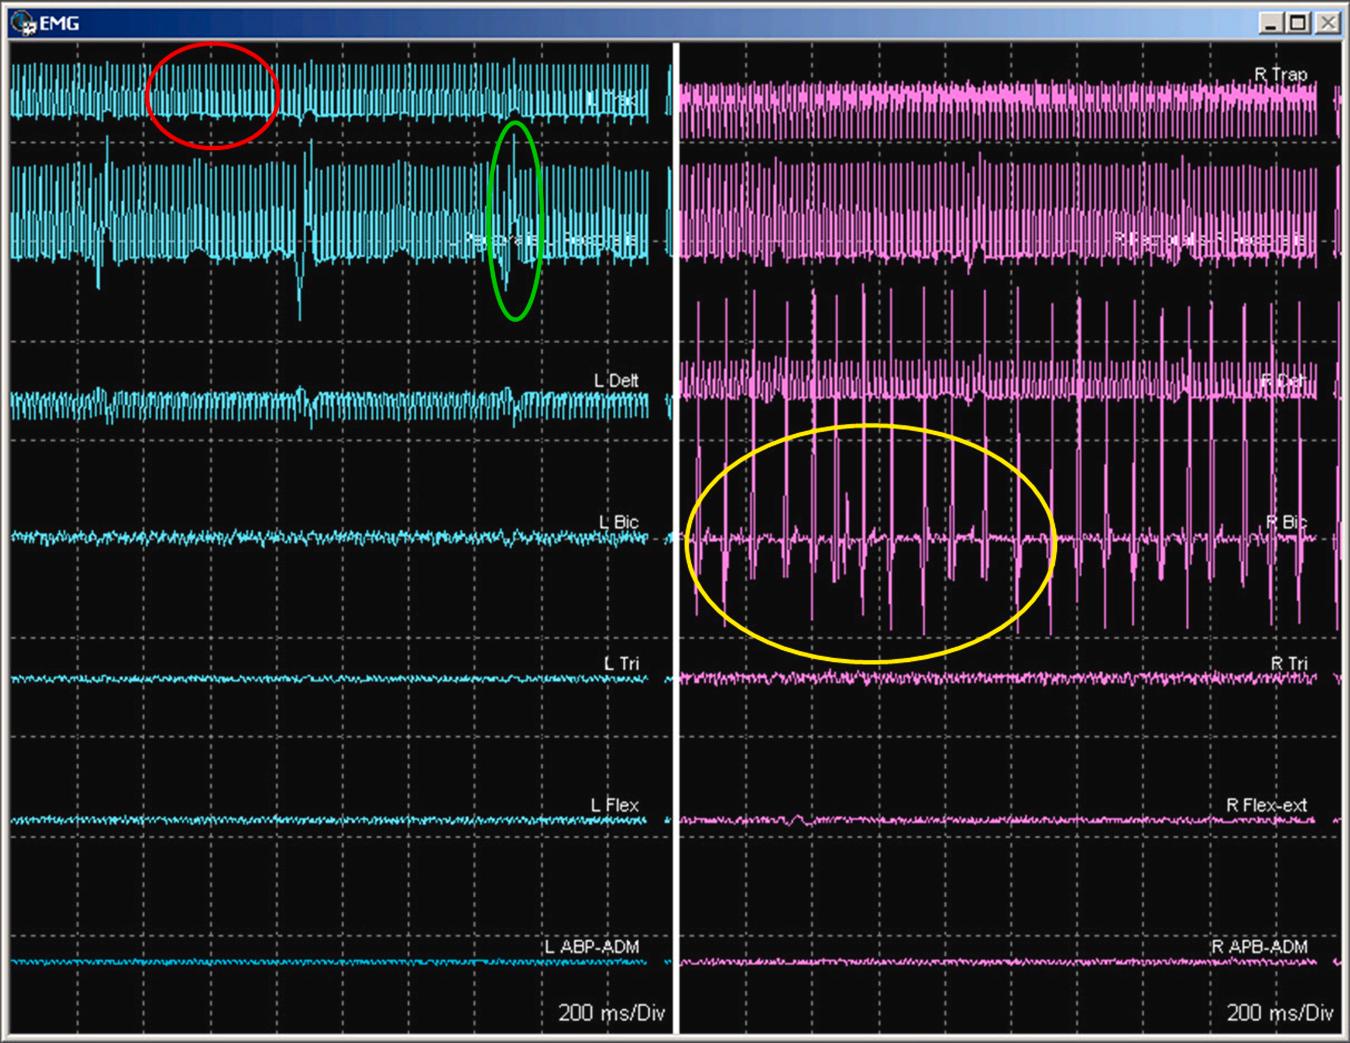 Figure 37.2, Three different wave forms, two of which are artifact. The response in the red circle is artifact from the stimulation device. The response in the green circle is from EKG artifact. The responses in the yellow circle are compound muscle action potentials generated by the antidromic activation of the alpha-motor neuron pool for this muscle group [2] .